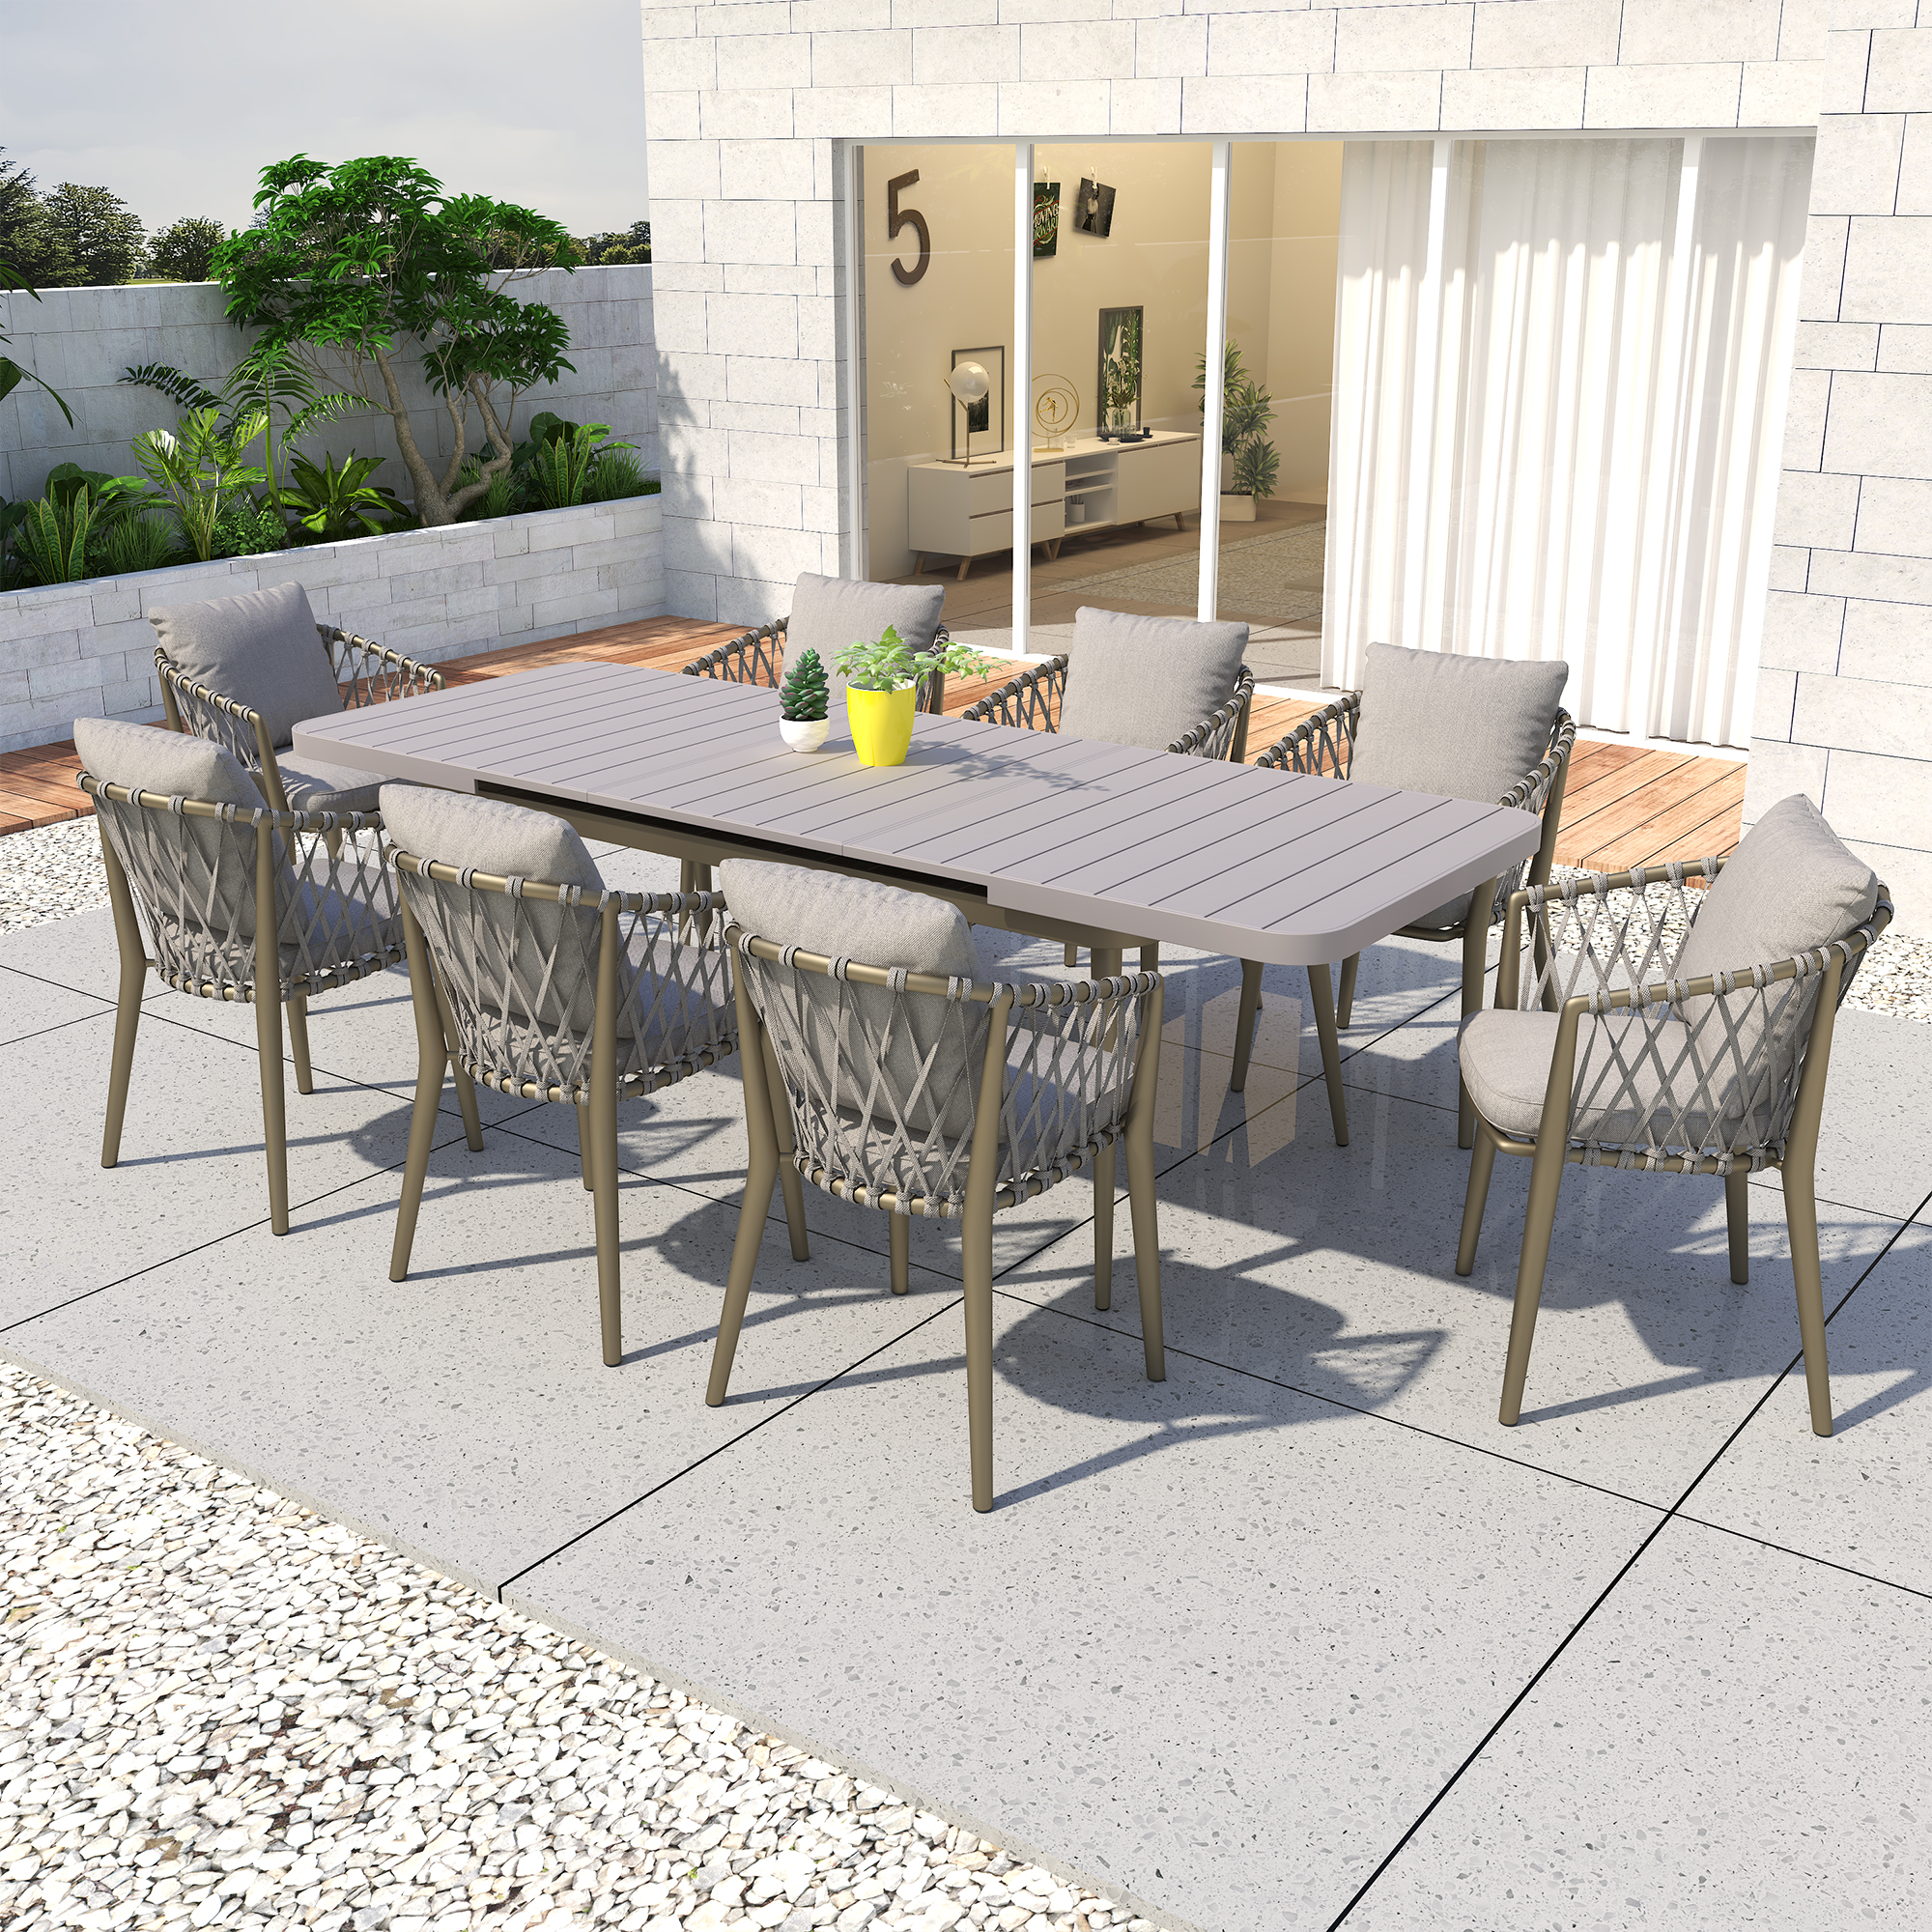 The new aluminum table lounge chair leads the fashion outdoor living！